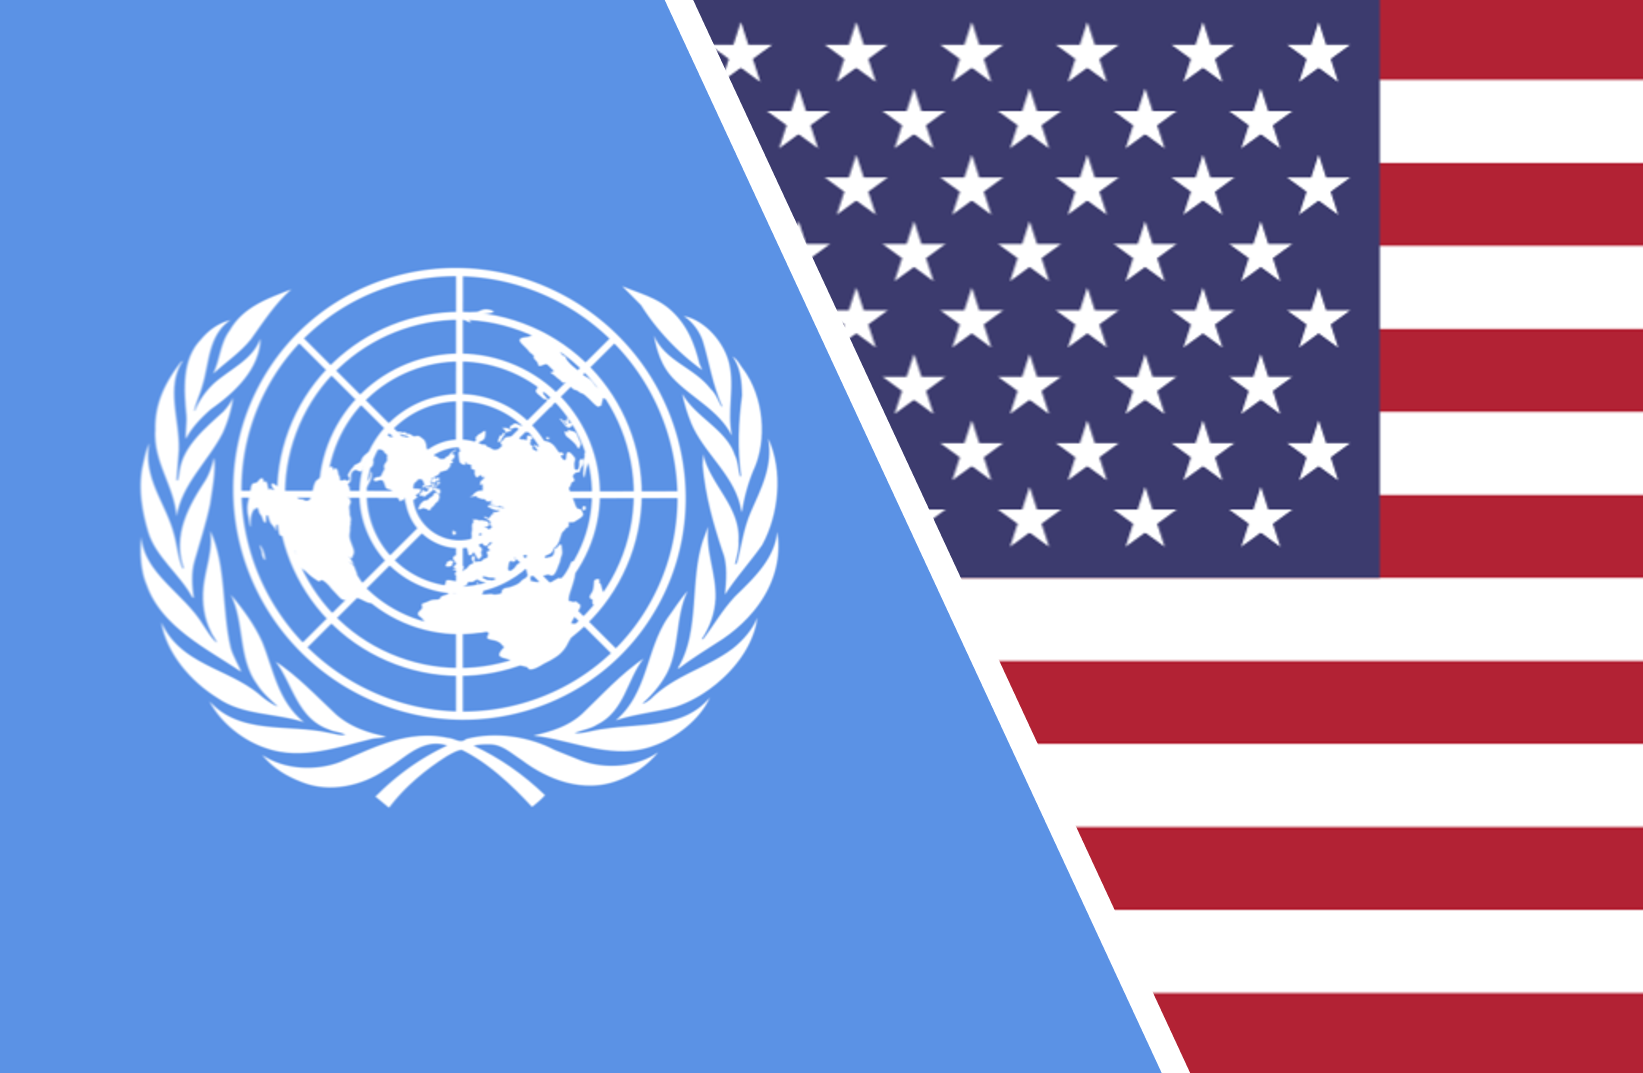 On the left, the flag of the United Nations. On the right, the flag of the United States of America.